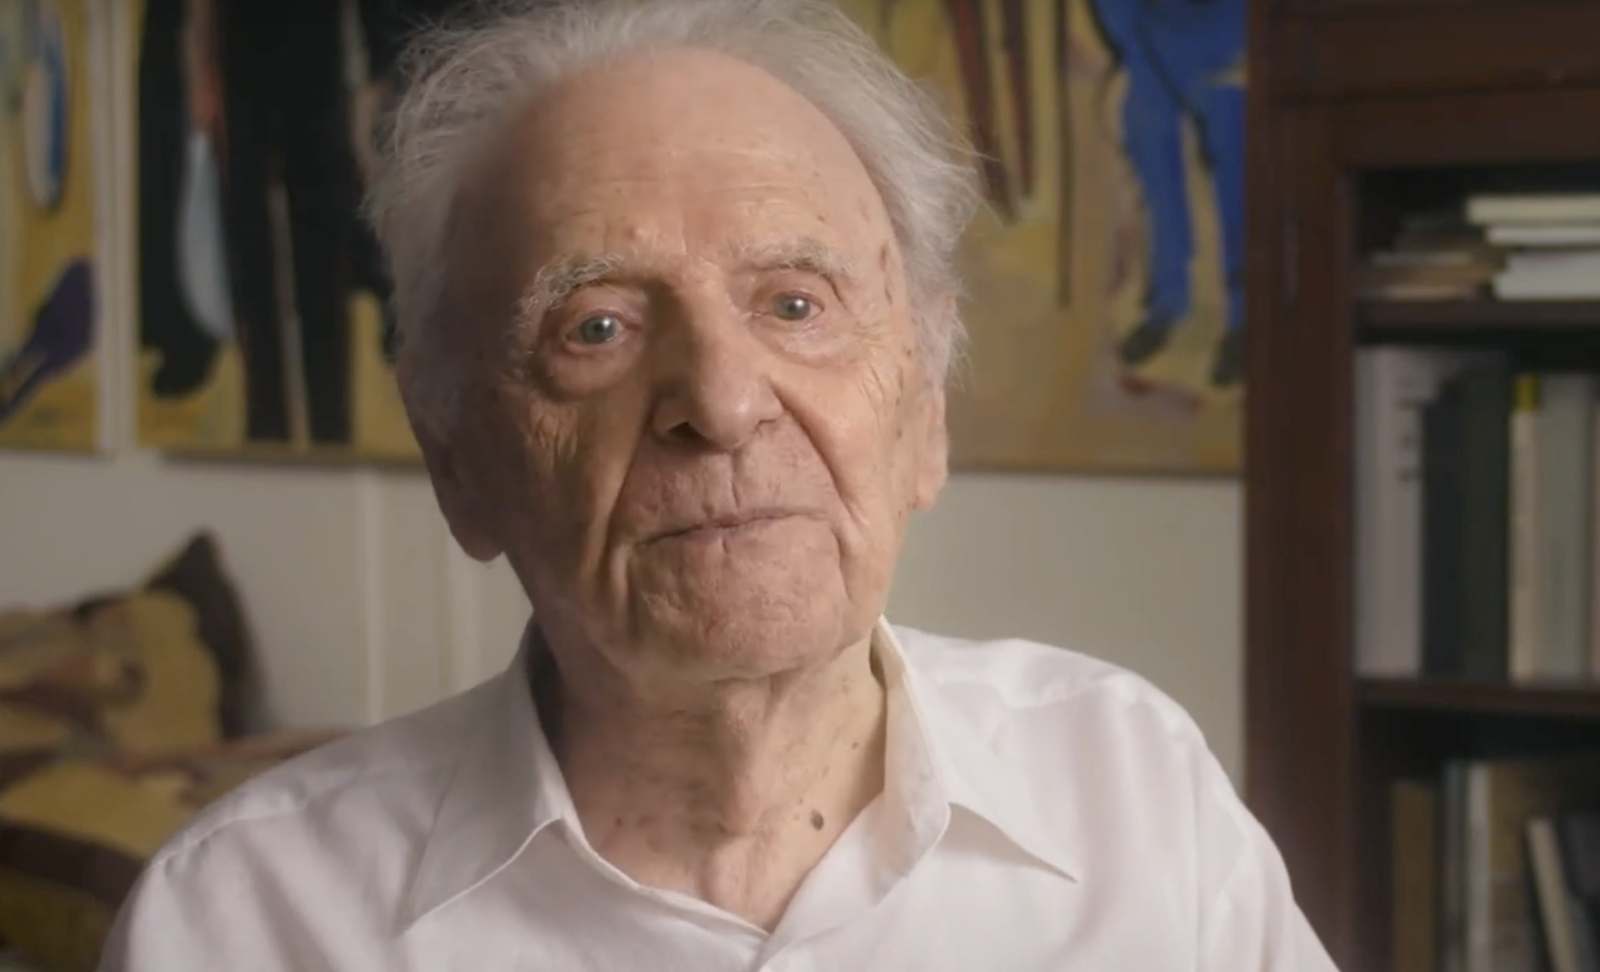 Watch Our Newest Film: “Serge Hollerbach: A Russian Painter in New York”